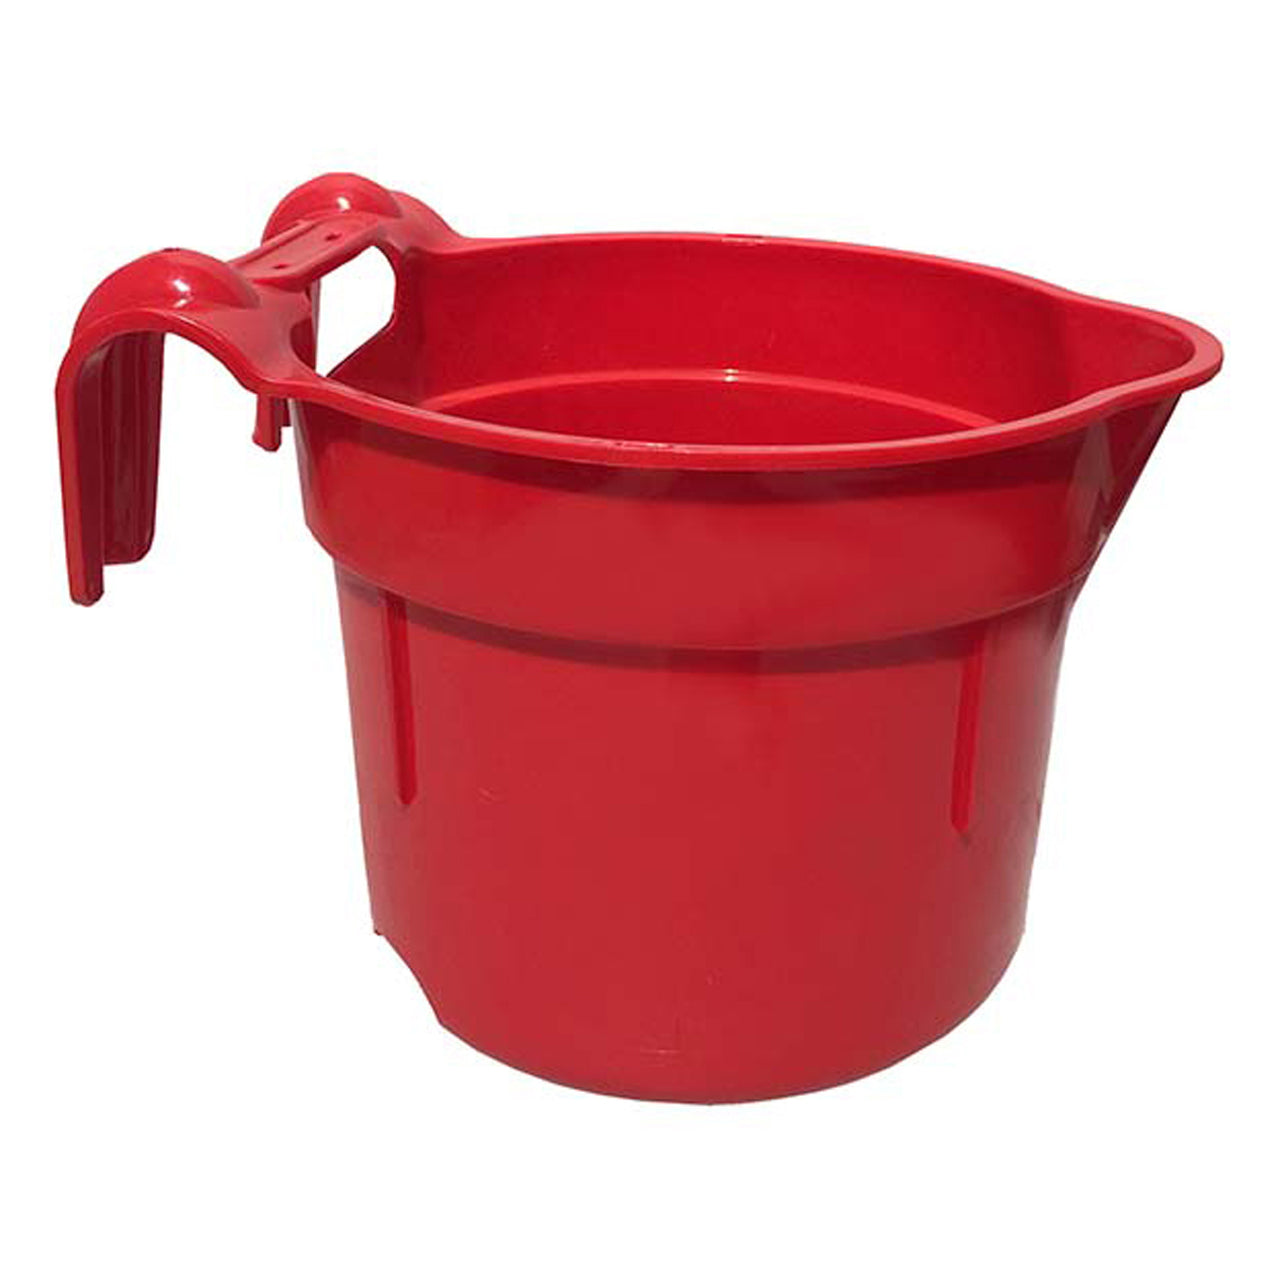 Tuff Stuff Round Fence Feeder 10 Qts - Red - Buckets Pails Feeders Scoops Tubs Bottles Tuff Stuff - Canada